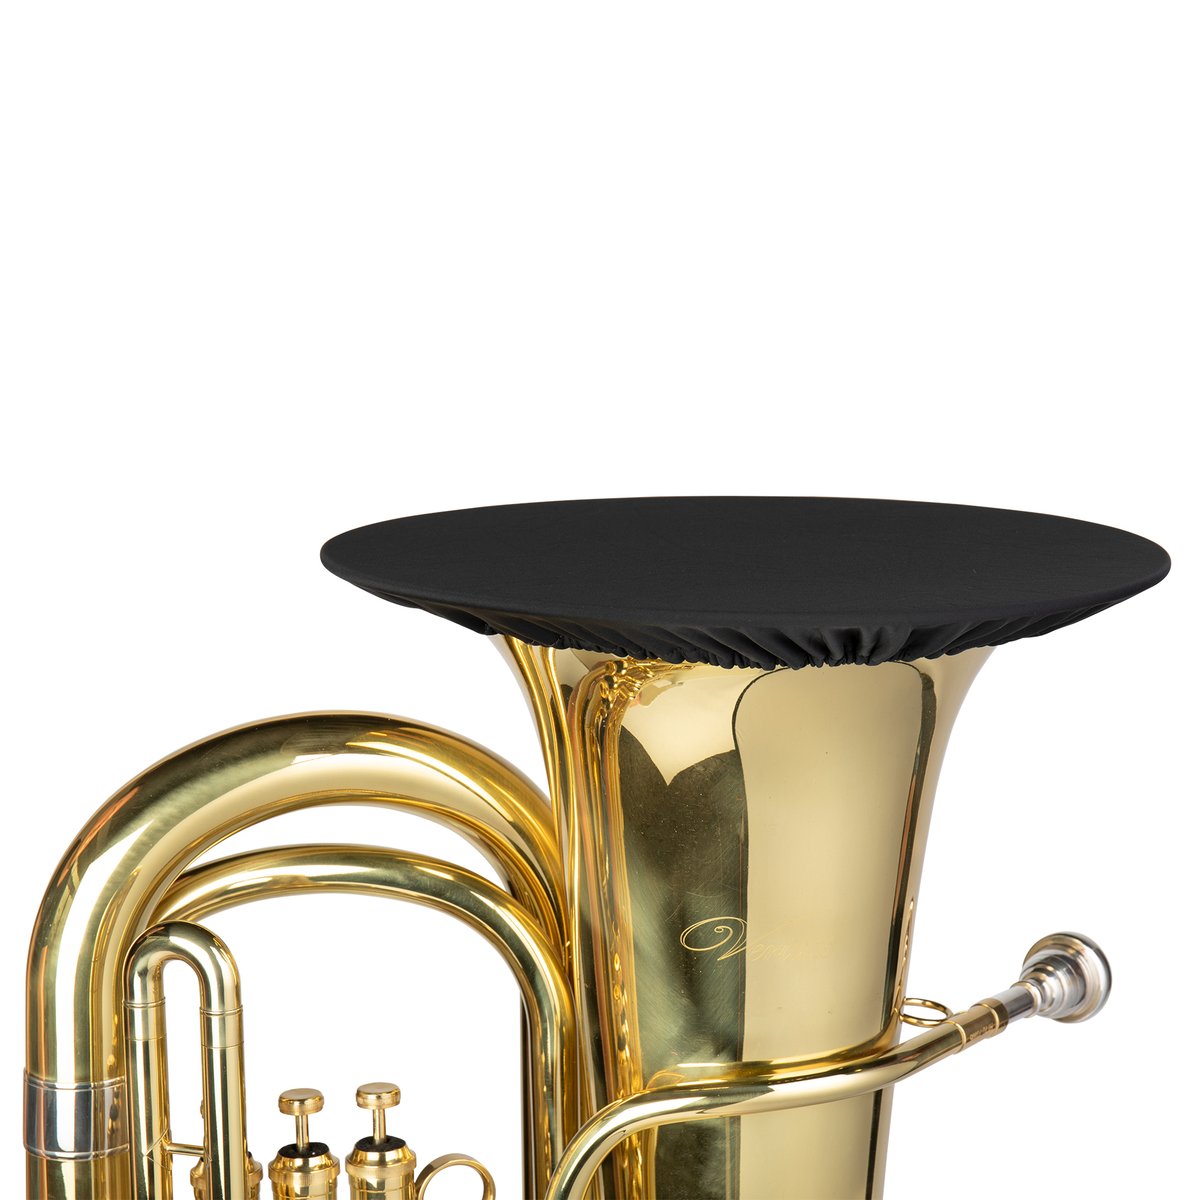 Double-Layer Wind Instrument Cover for Bell Sizes Ranging from 11.25 to 13.25-Inches (Black Color)